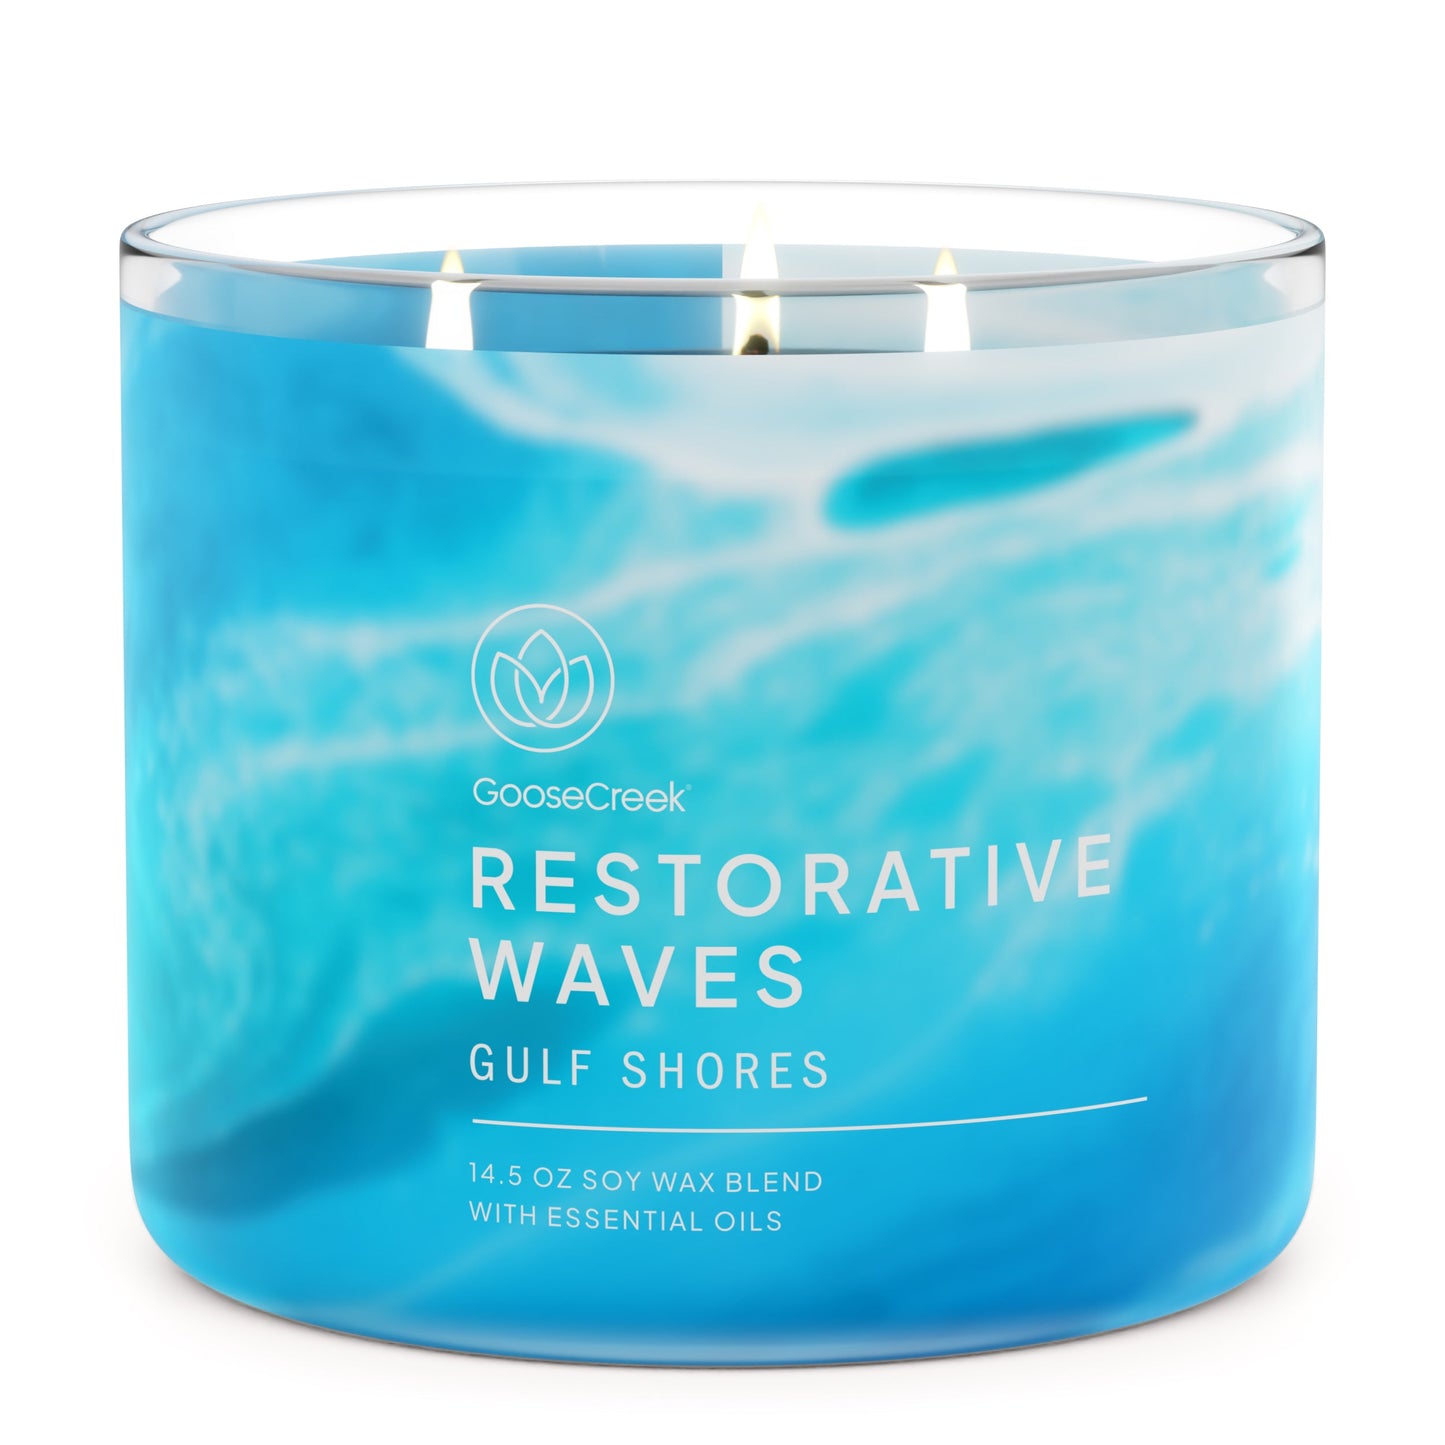 Gulf Shores Large 3-Wick Candle